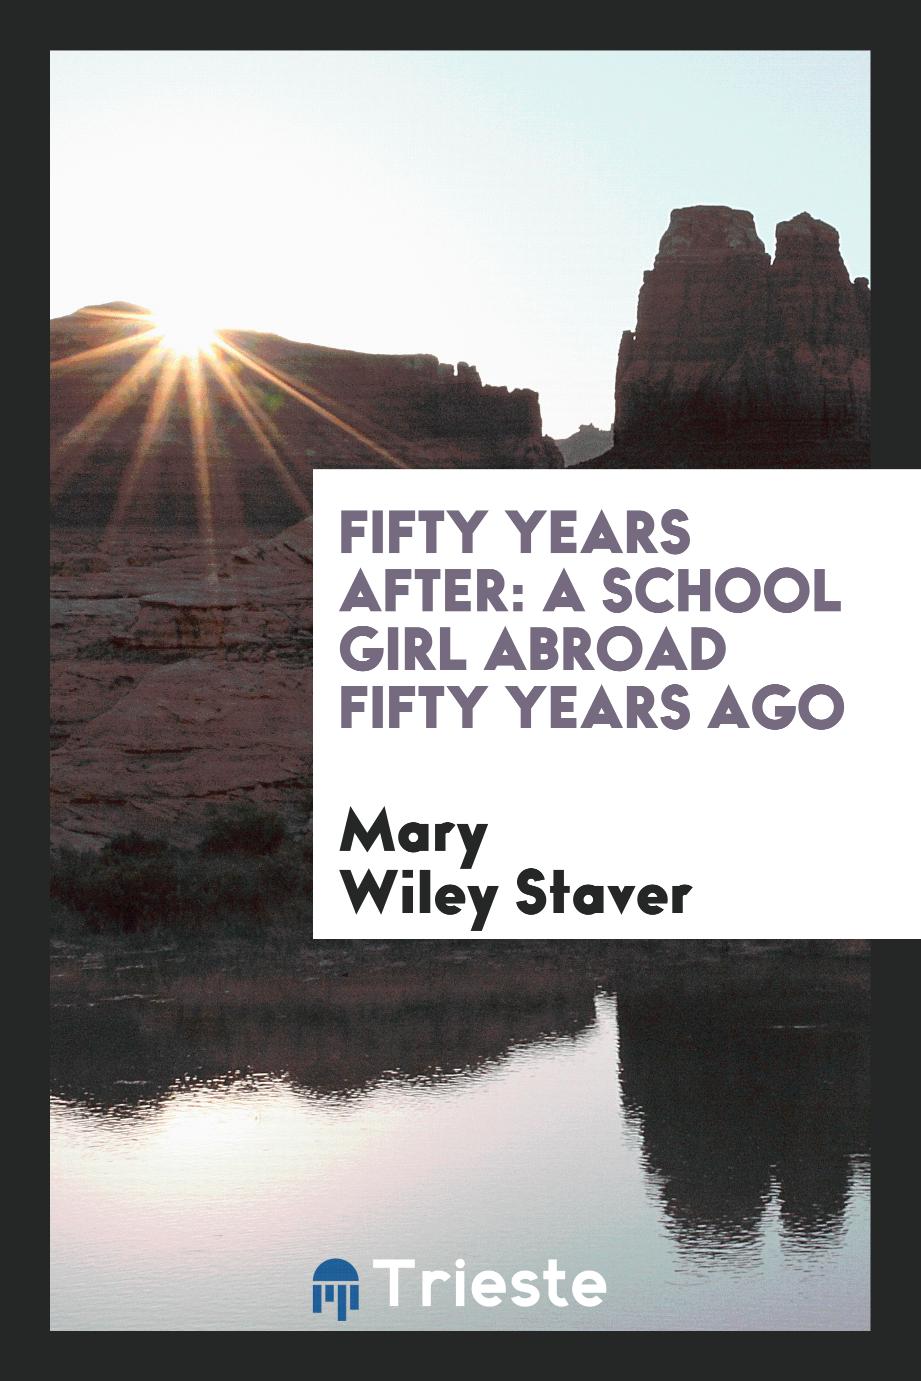 Fifty Years After: A School Girl Abroad Fifty Years Ago